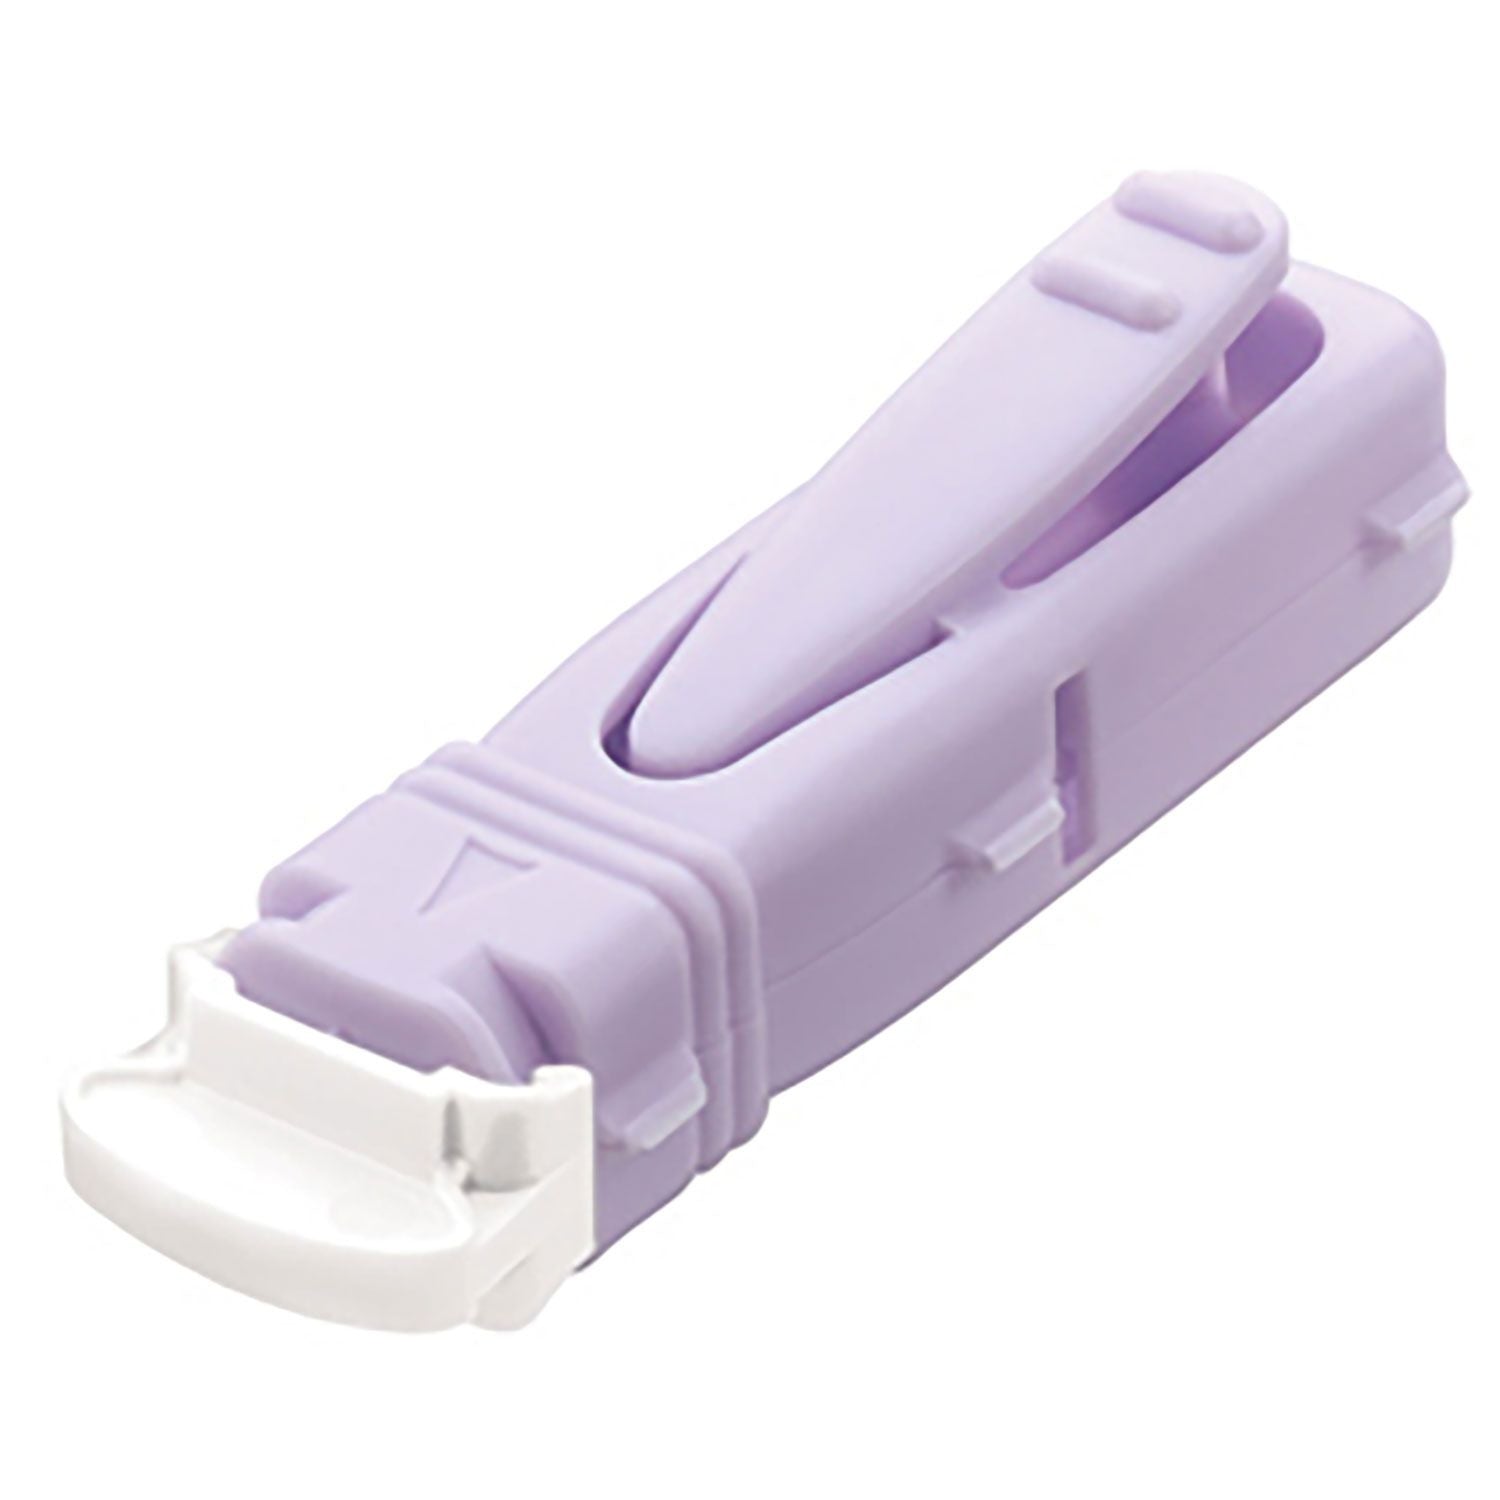 Disposable Inspiratory One-Way Valve MouthPieces